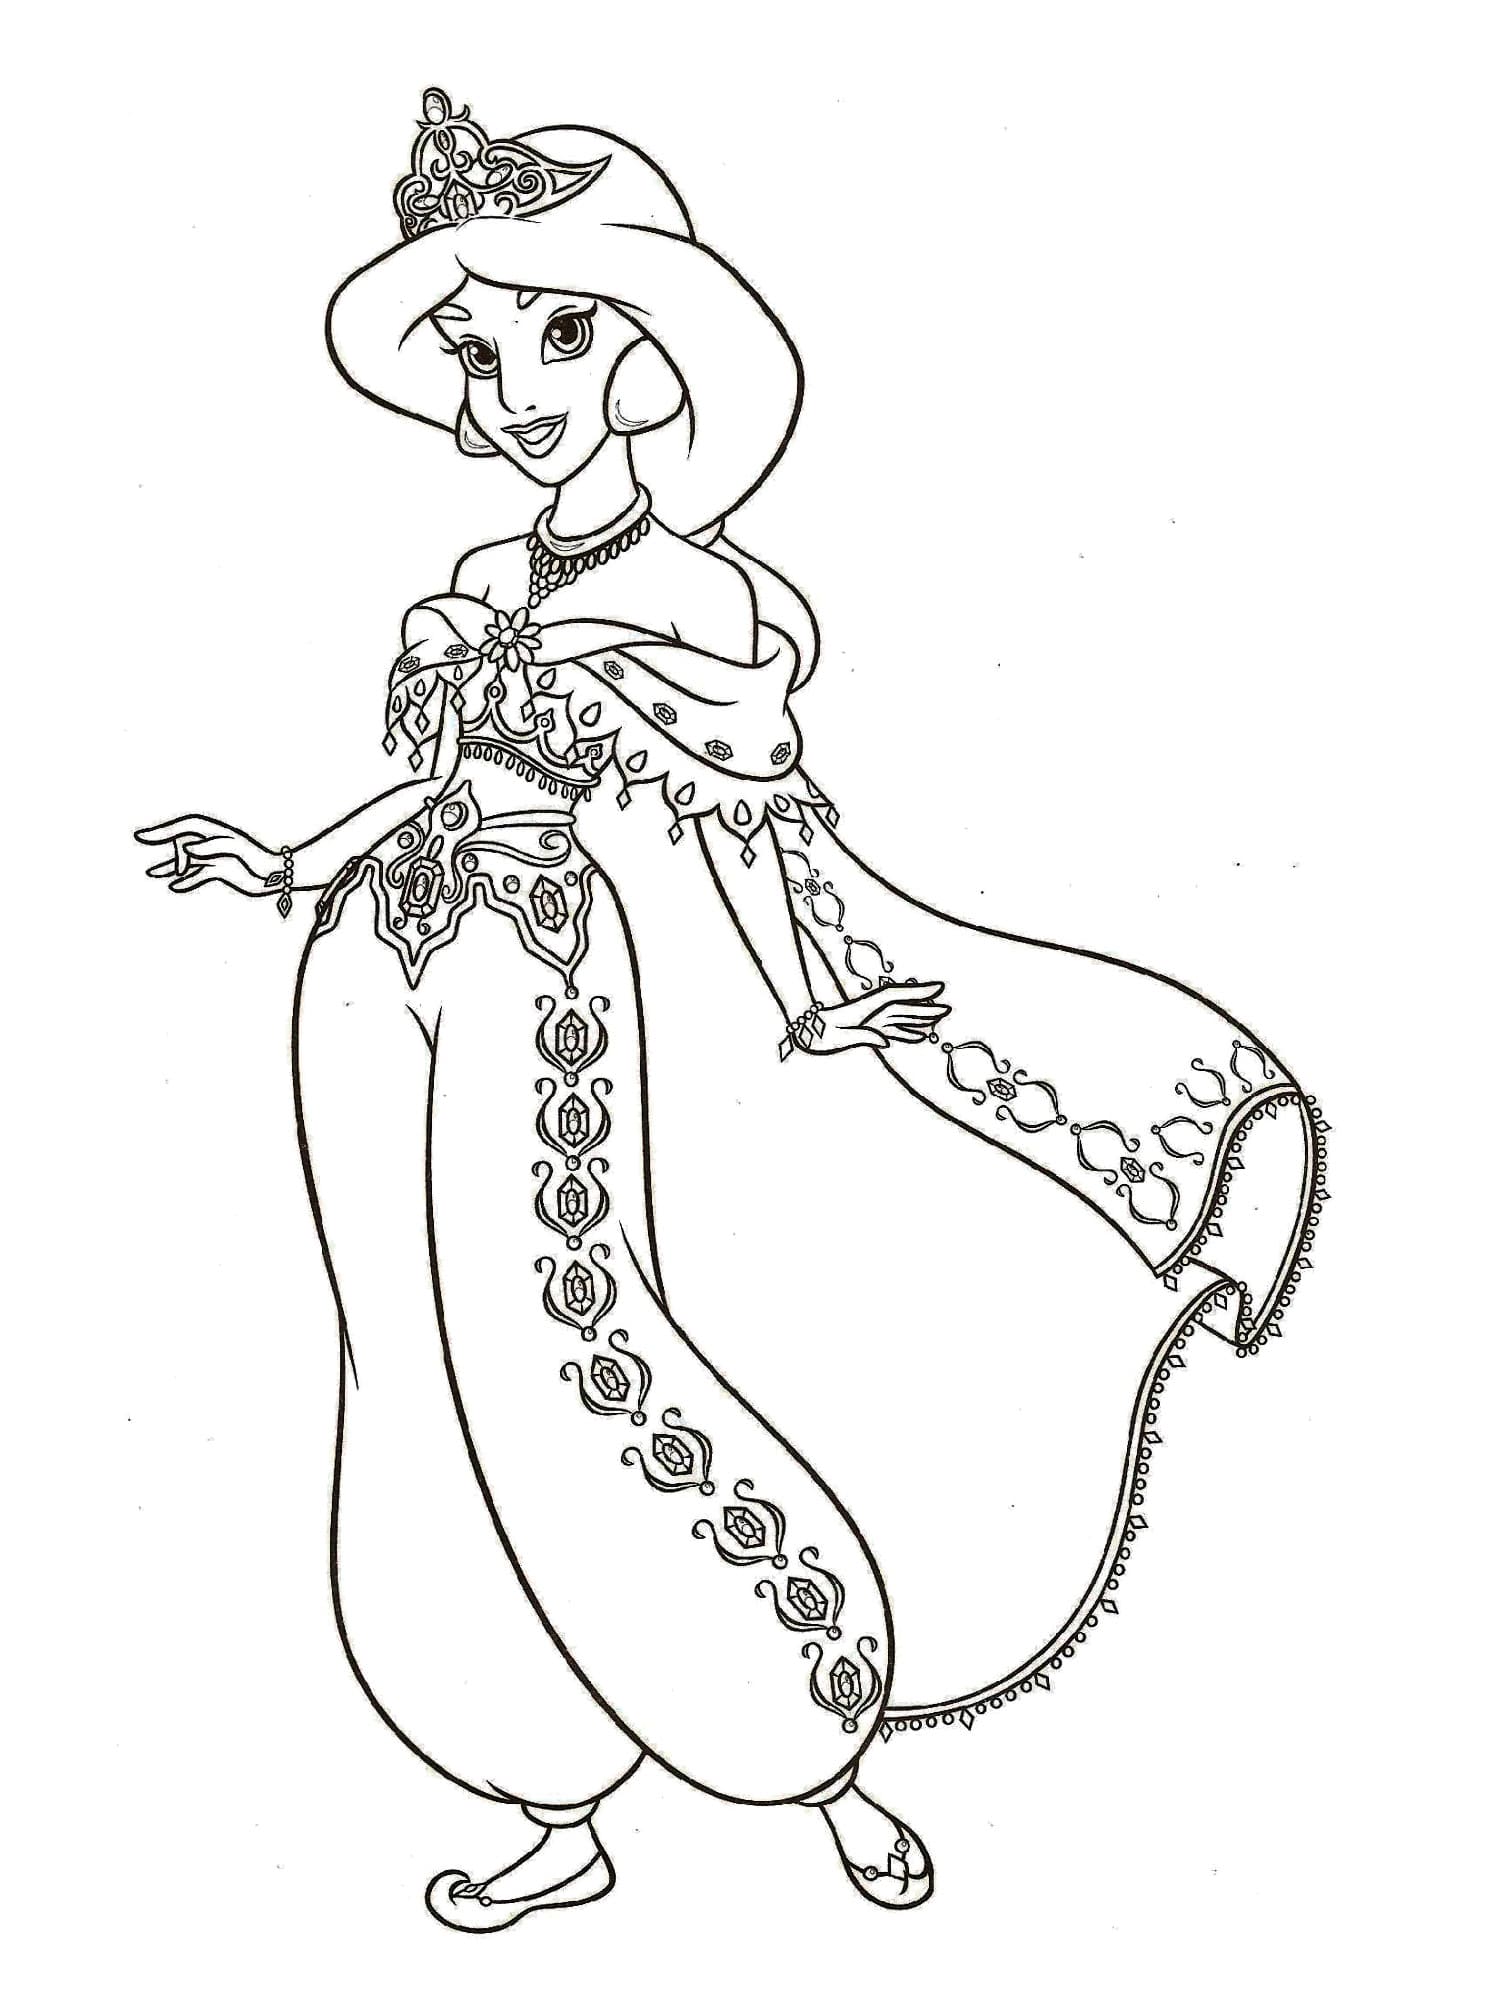 Princess Jasmine from Disney Aladdin coloring page - Download, Print or  Color Online for Free